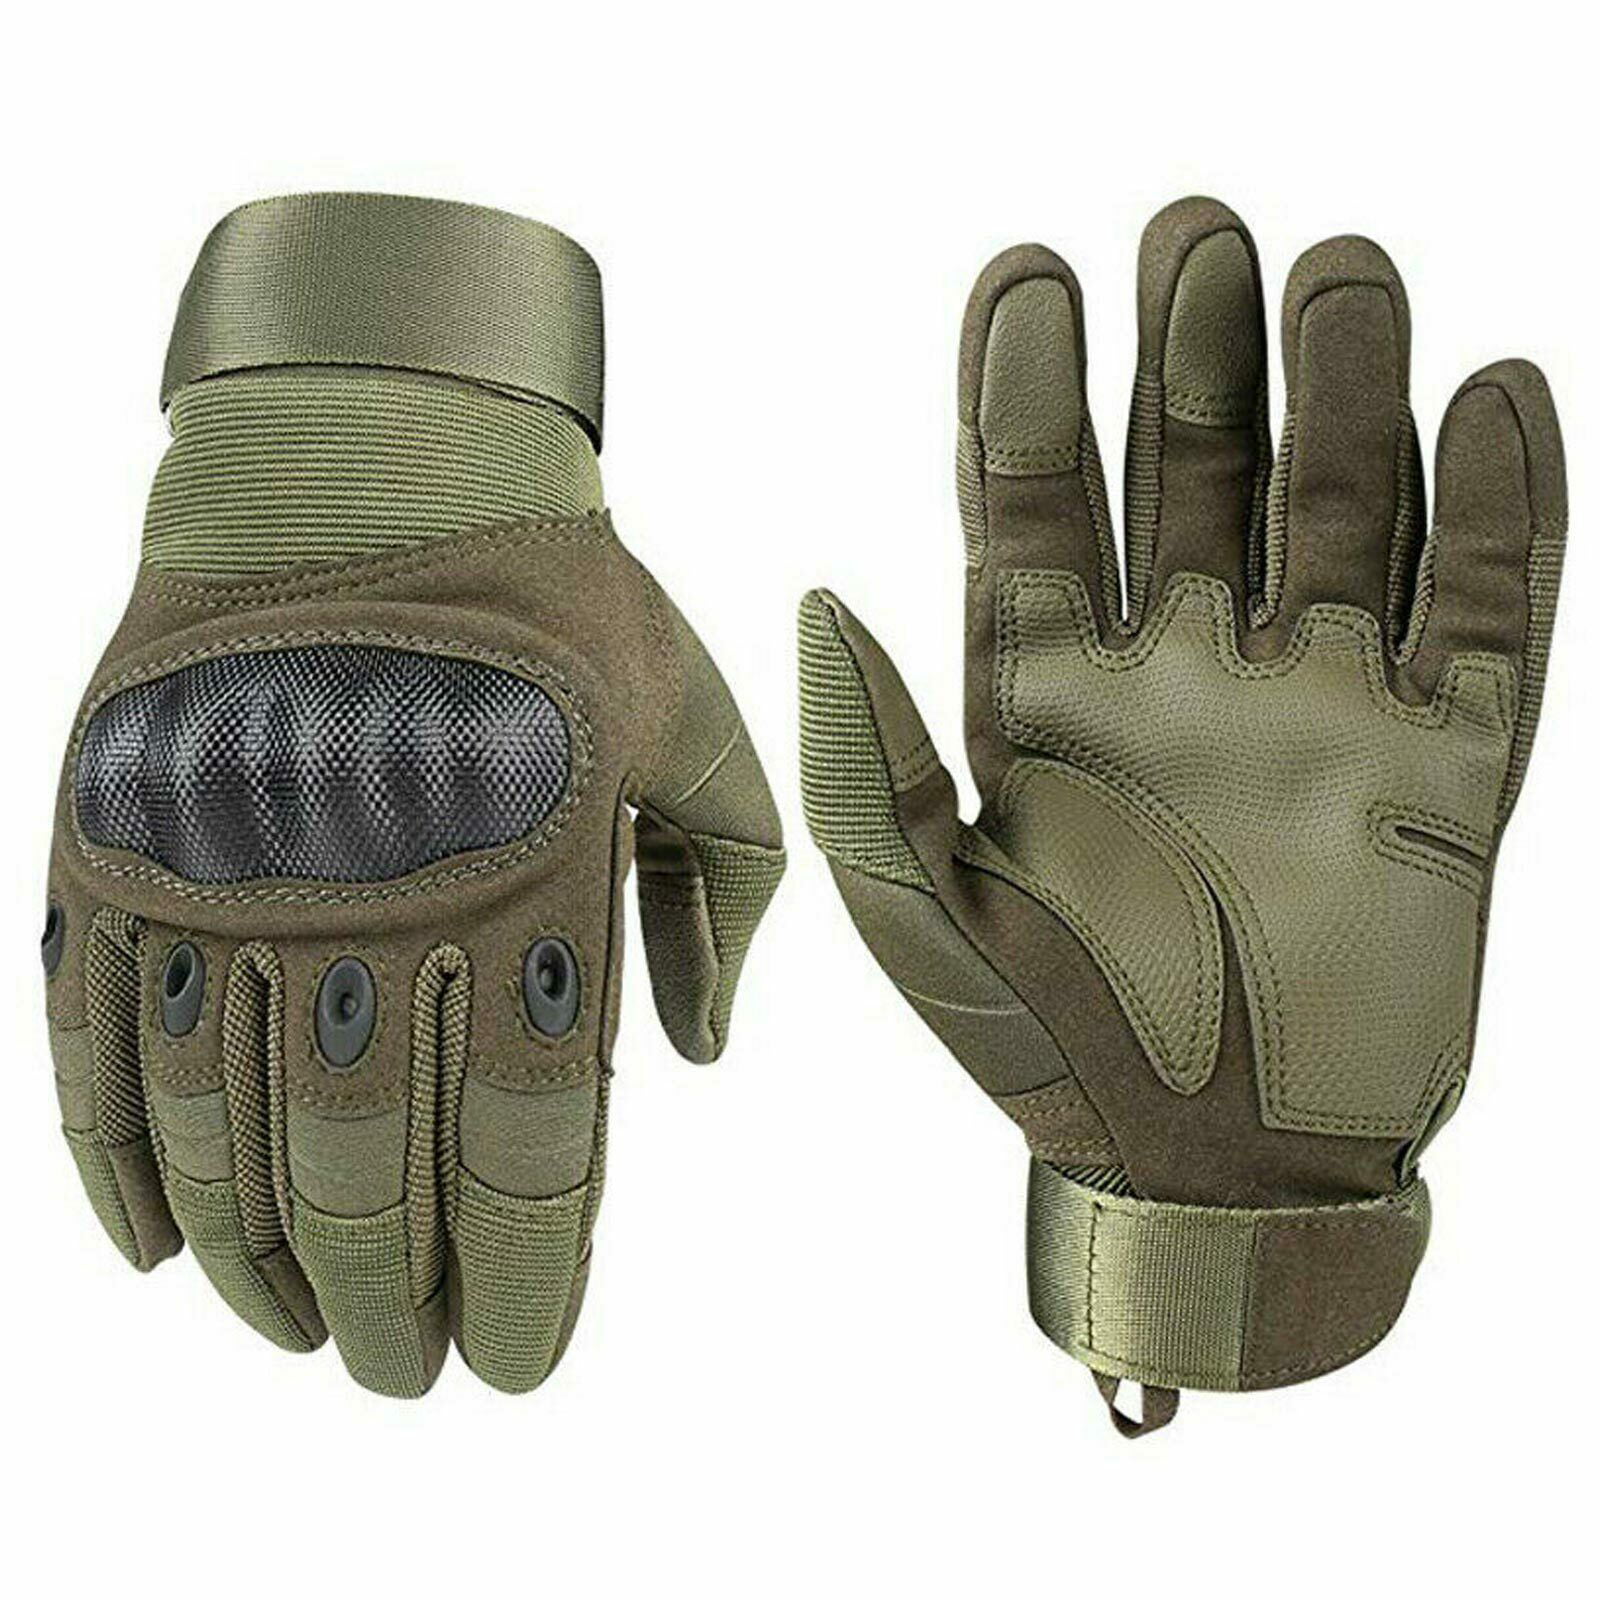 Hard Knuckle Tactical Gloves Men Military Glove Shooting Airsoft Paintball Large for sale online 